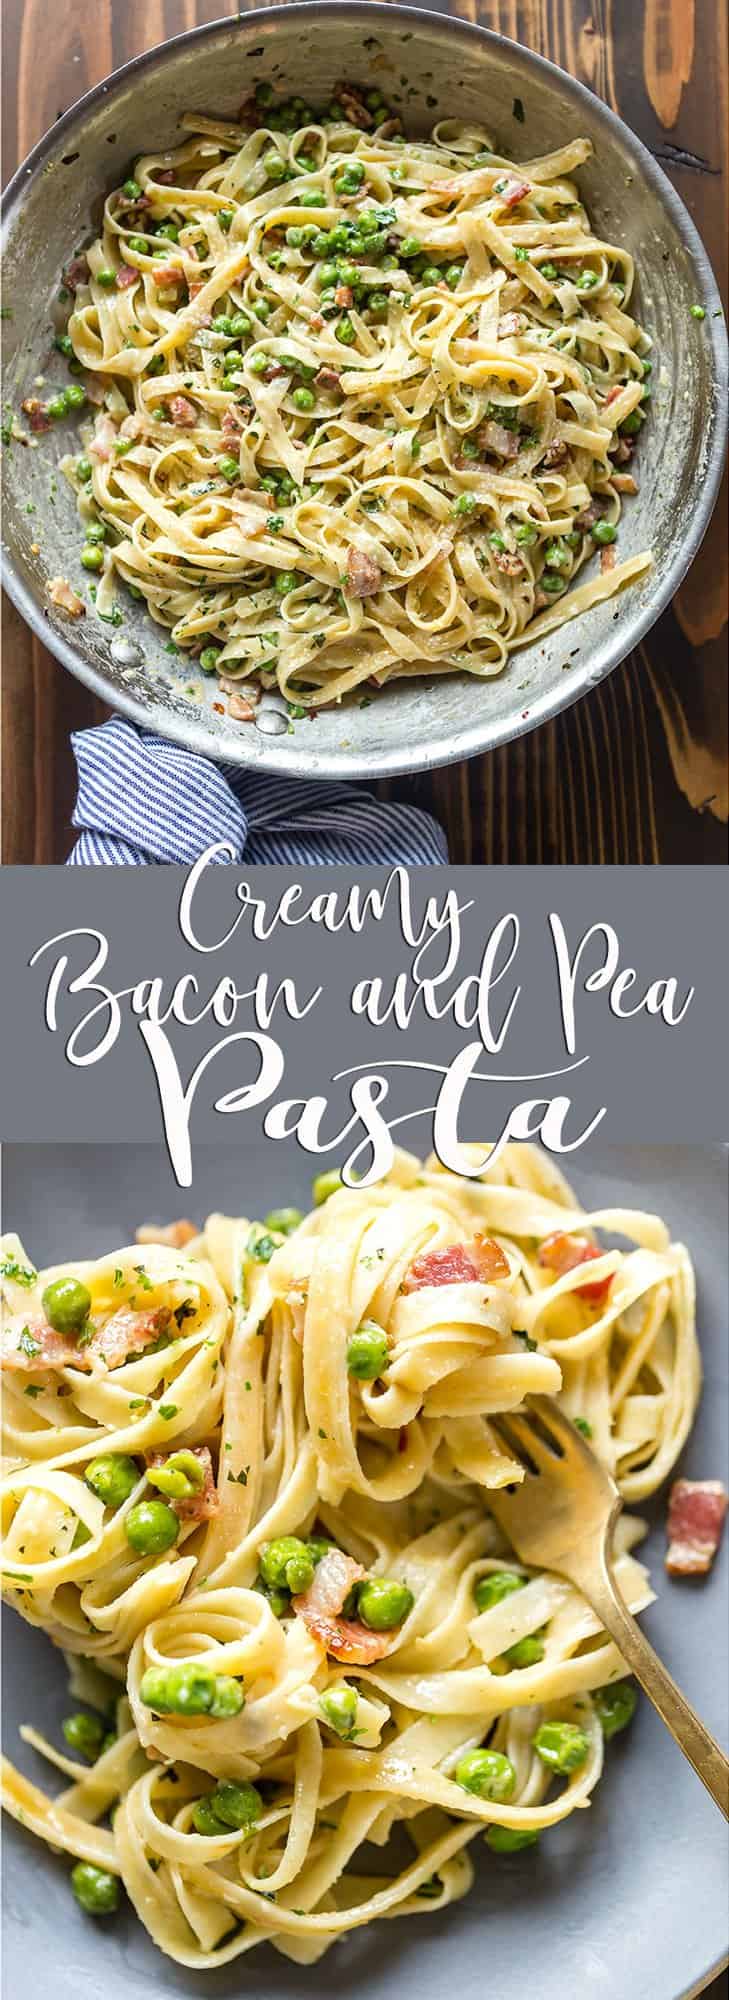 This quick Creamy Pasta with Pancetta and Peas only takes 15 minutes and is an easy and elegant dinner for any night of the week! @QFCgrocery #QFCdelivery #sponsored Pasta with peas and bacon | Pasta with peas and pancetta recipe | noodles with peas and bacon | cramy pasta recipe | Easy pasta recipe | easy dinner recipe | 15 minute dinner | quick pasta recipe | date night recipe | peas and bacon cream sauce